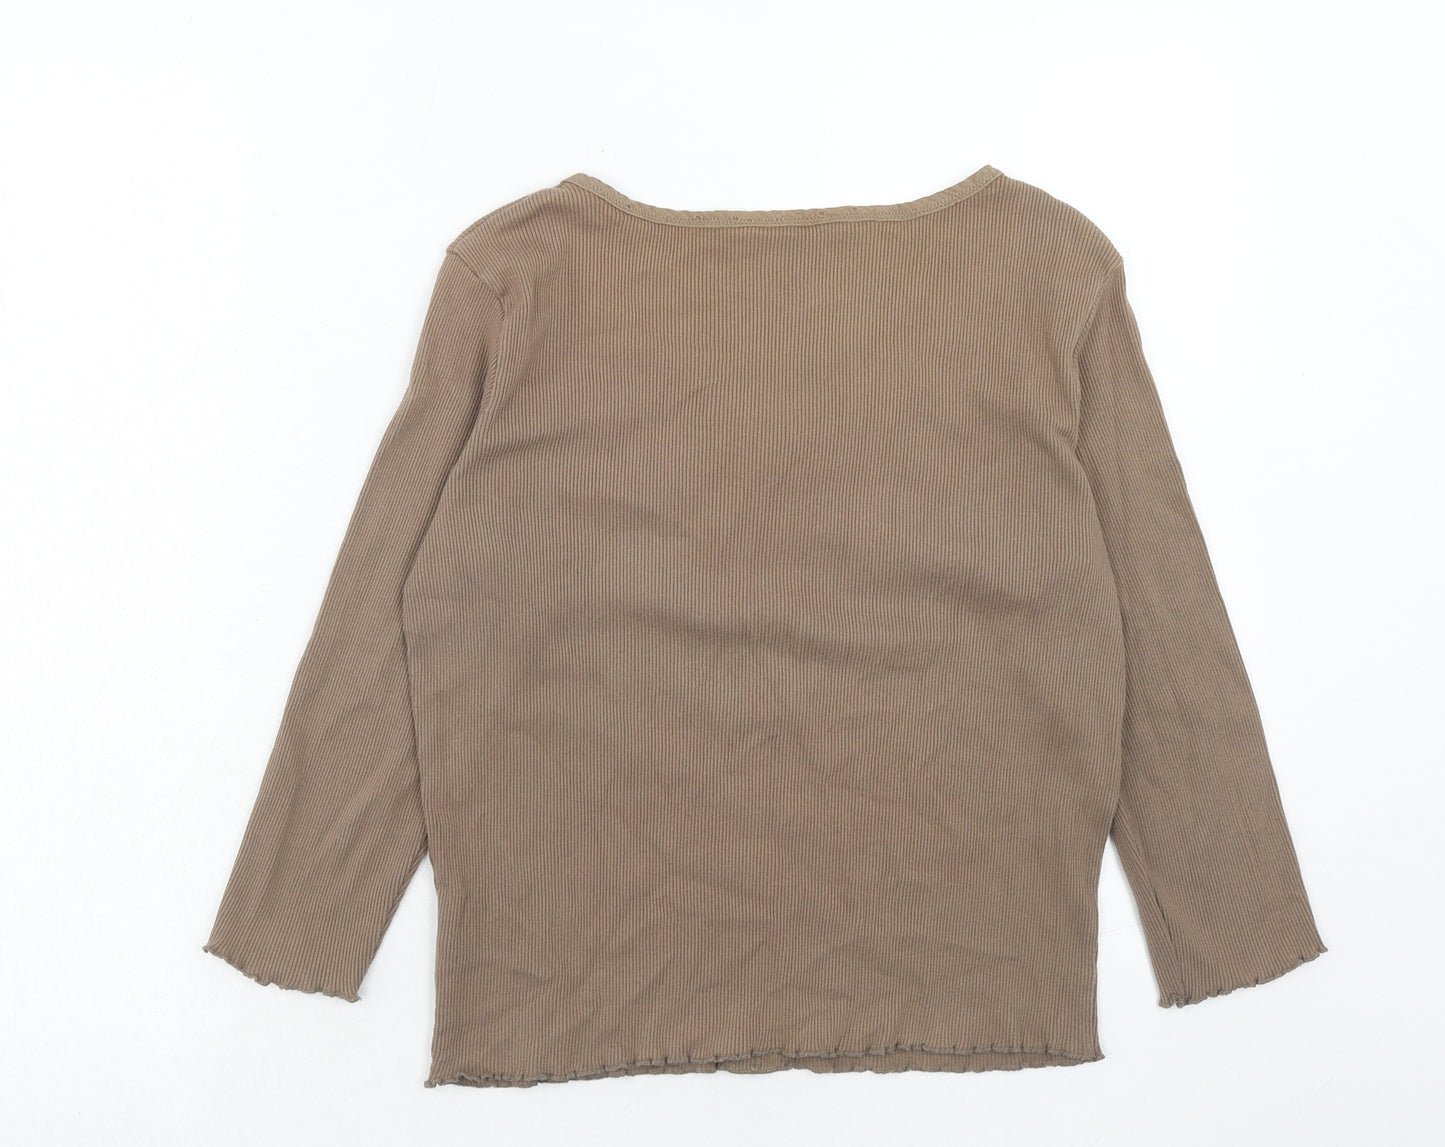 Monsoon Womens Brown Cotton Basic T-Shirt Size 14 Scoop Neck